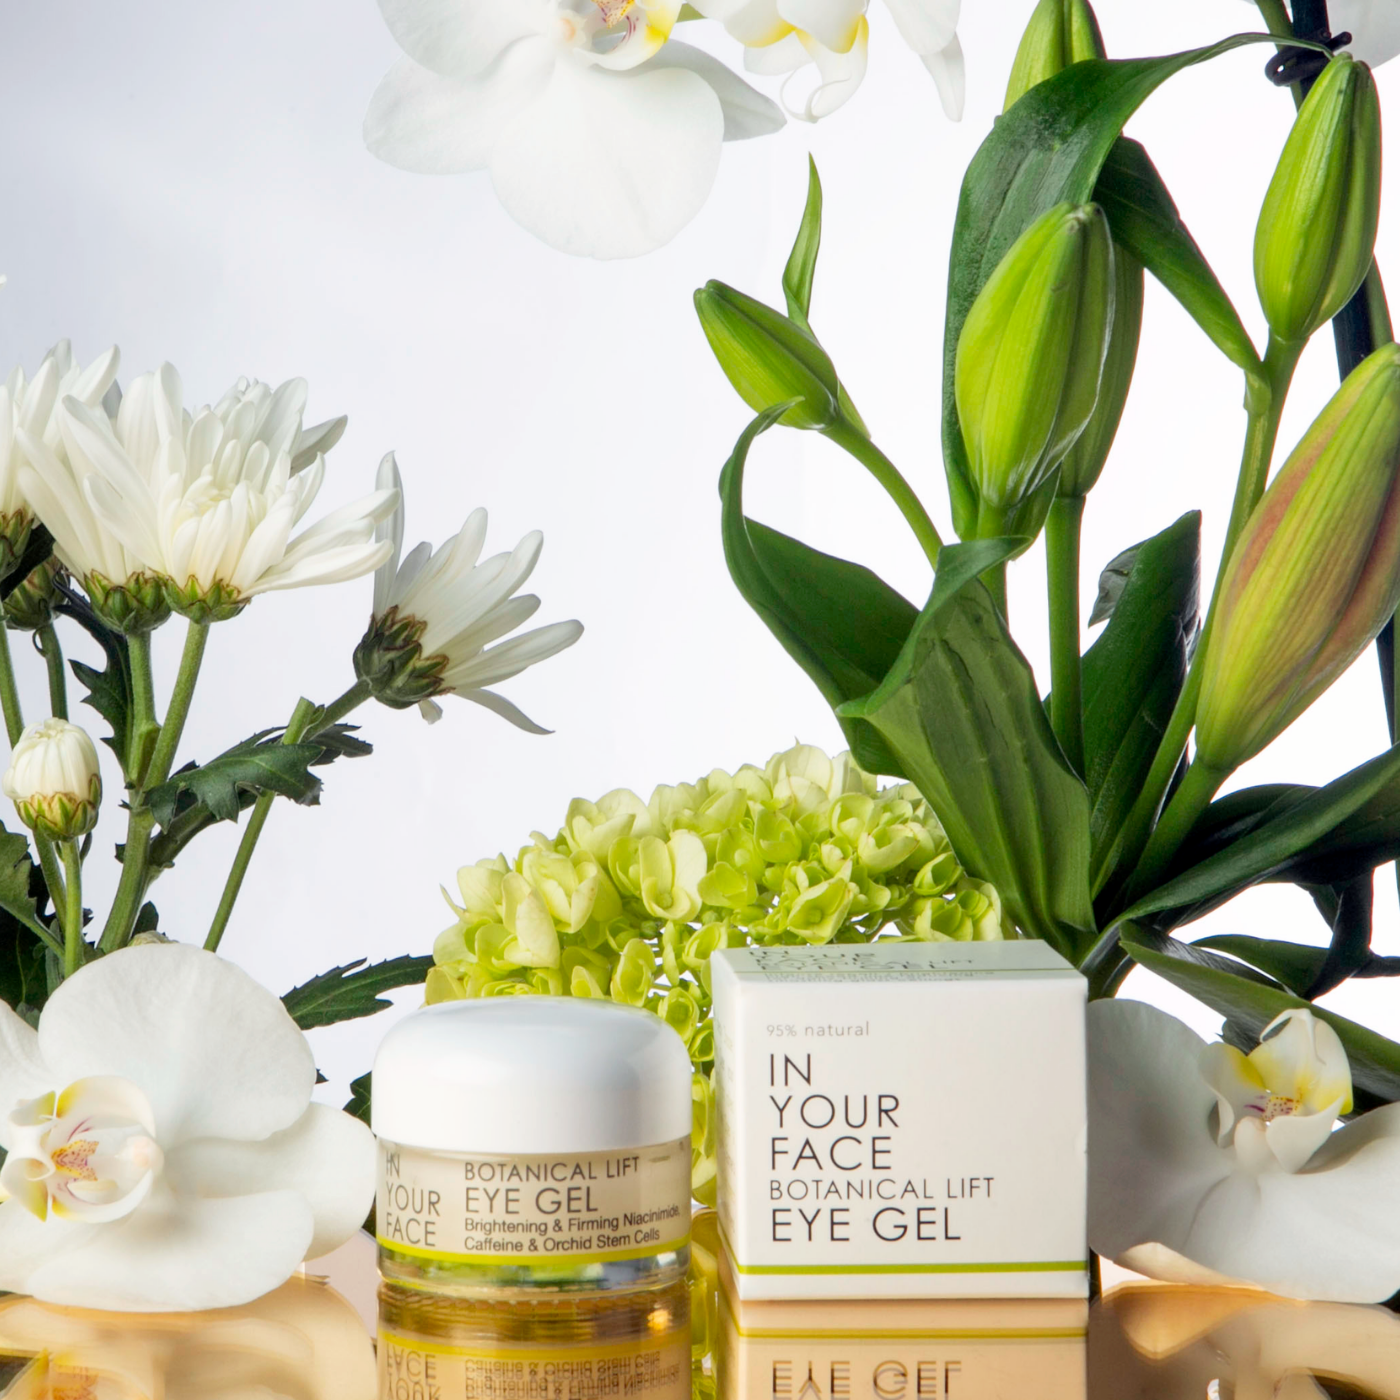 a beautiful image of the EYE GEL next to some white flowers and botanicals.